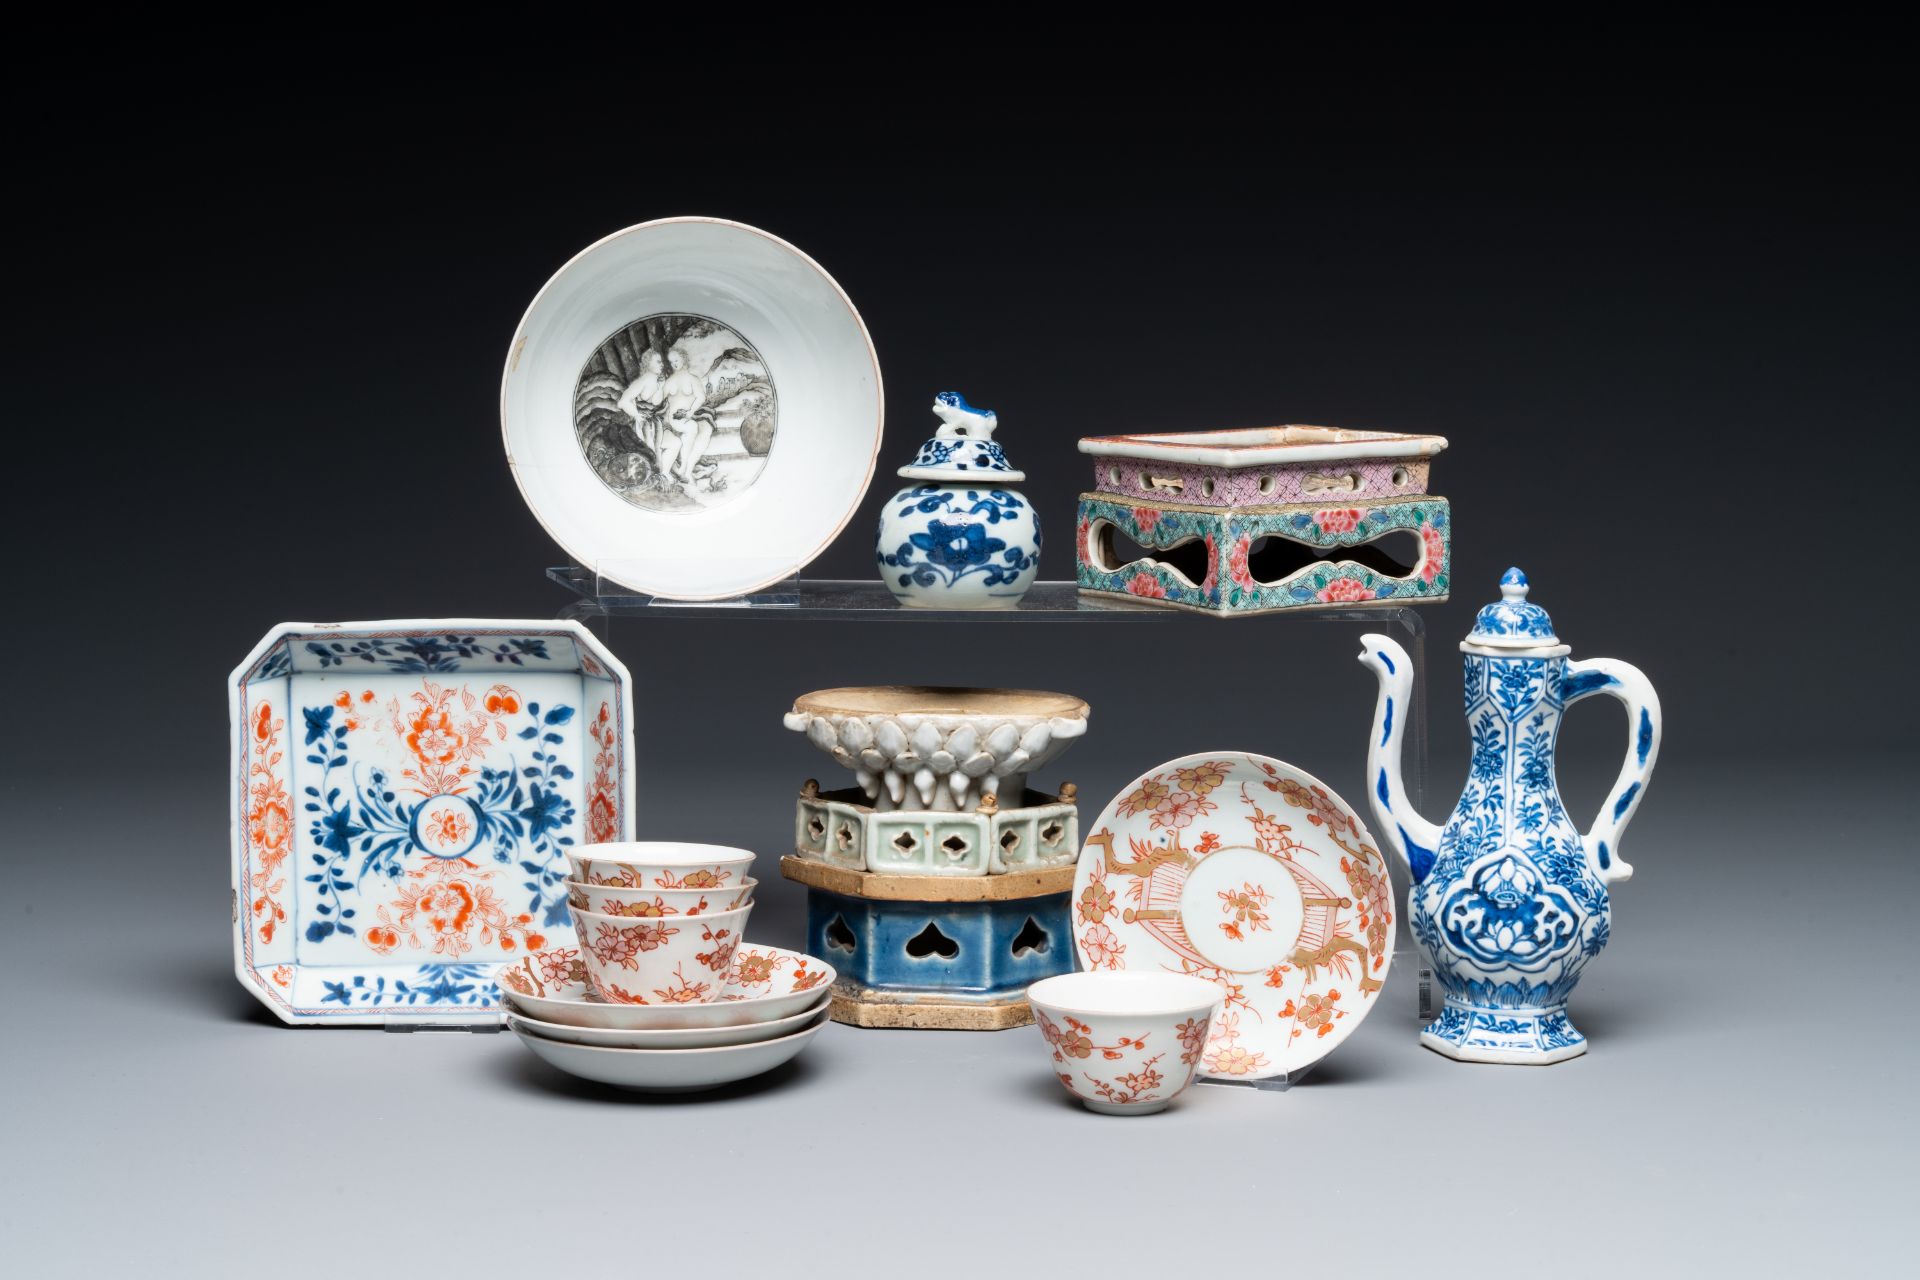 A varied collection of Chinese and Japanese porcelain, 18th century